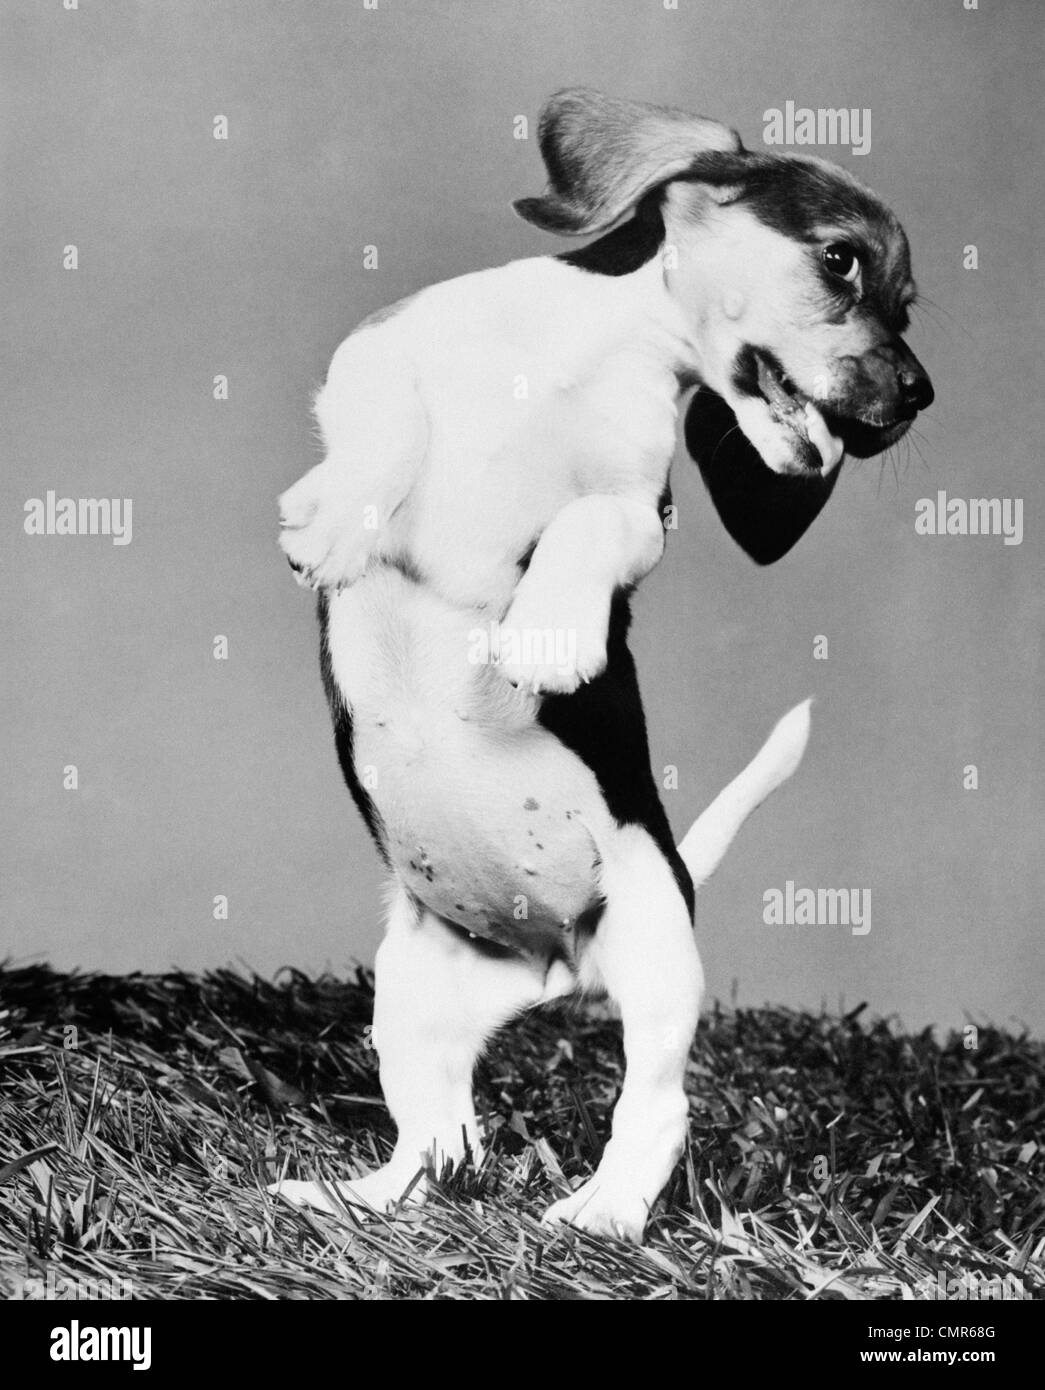 1950s BEAGLE PUP ON HIND LEGS WITH HEAD TWISTED TO SIDE & TONGUE HANGING OUT Stock Photo